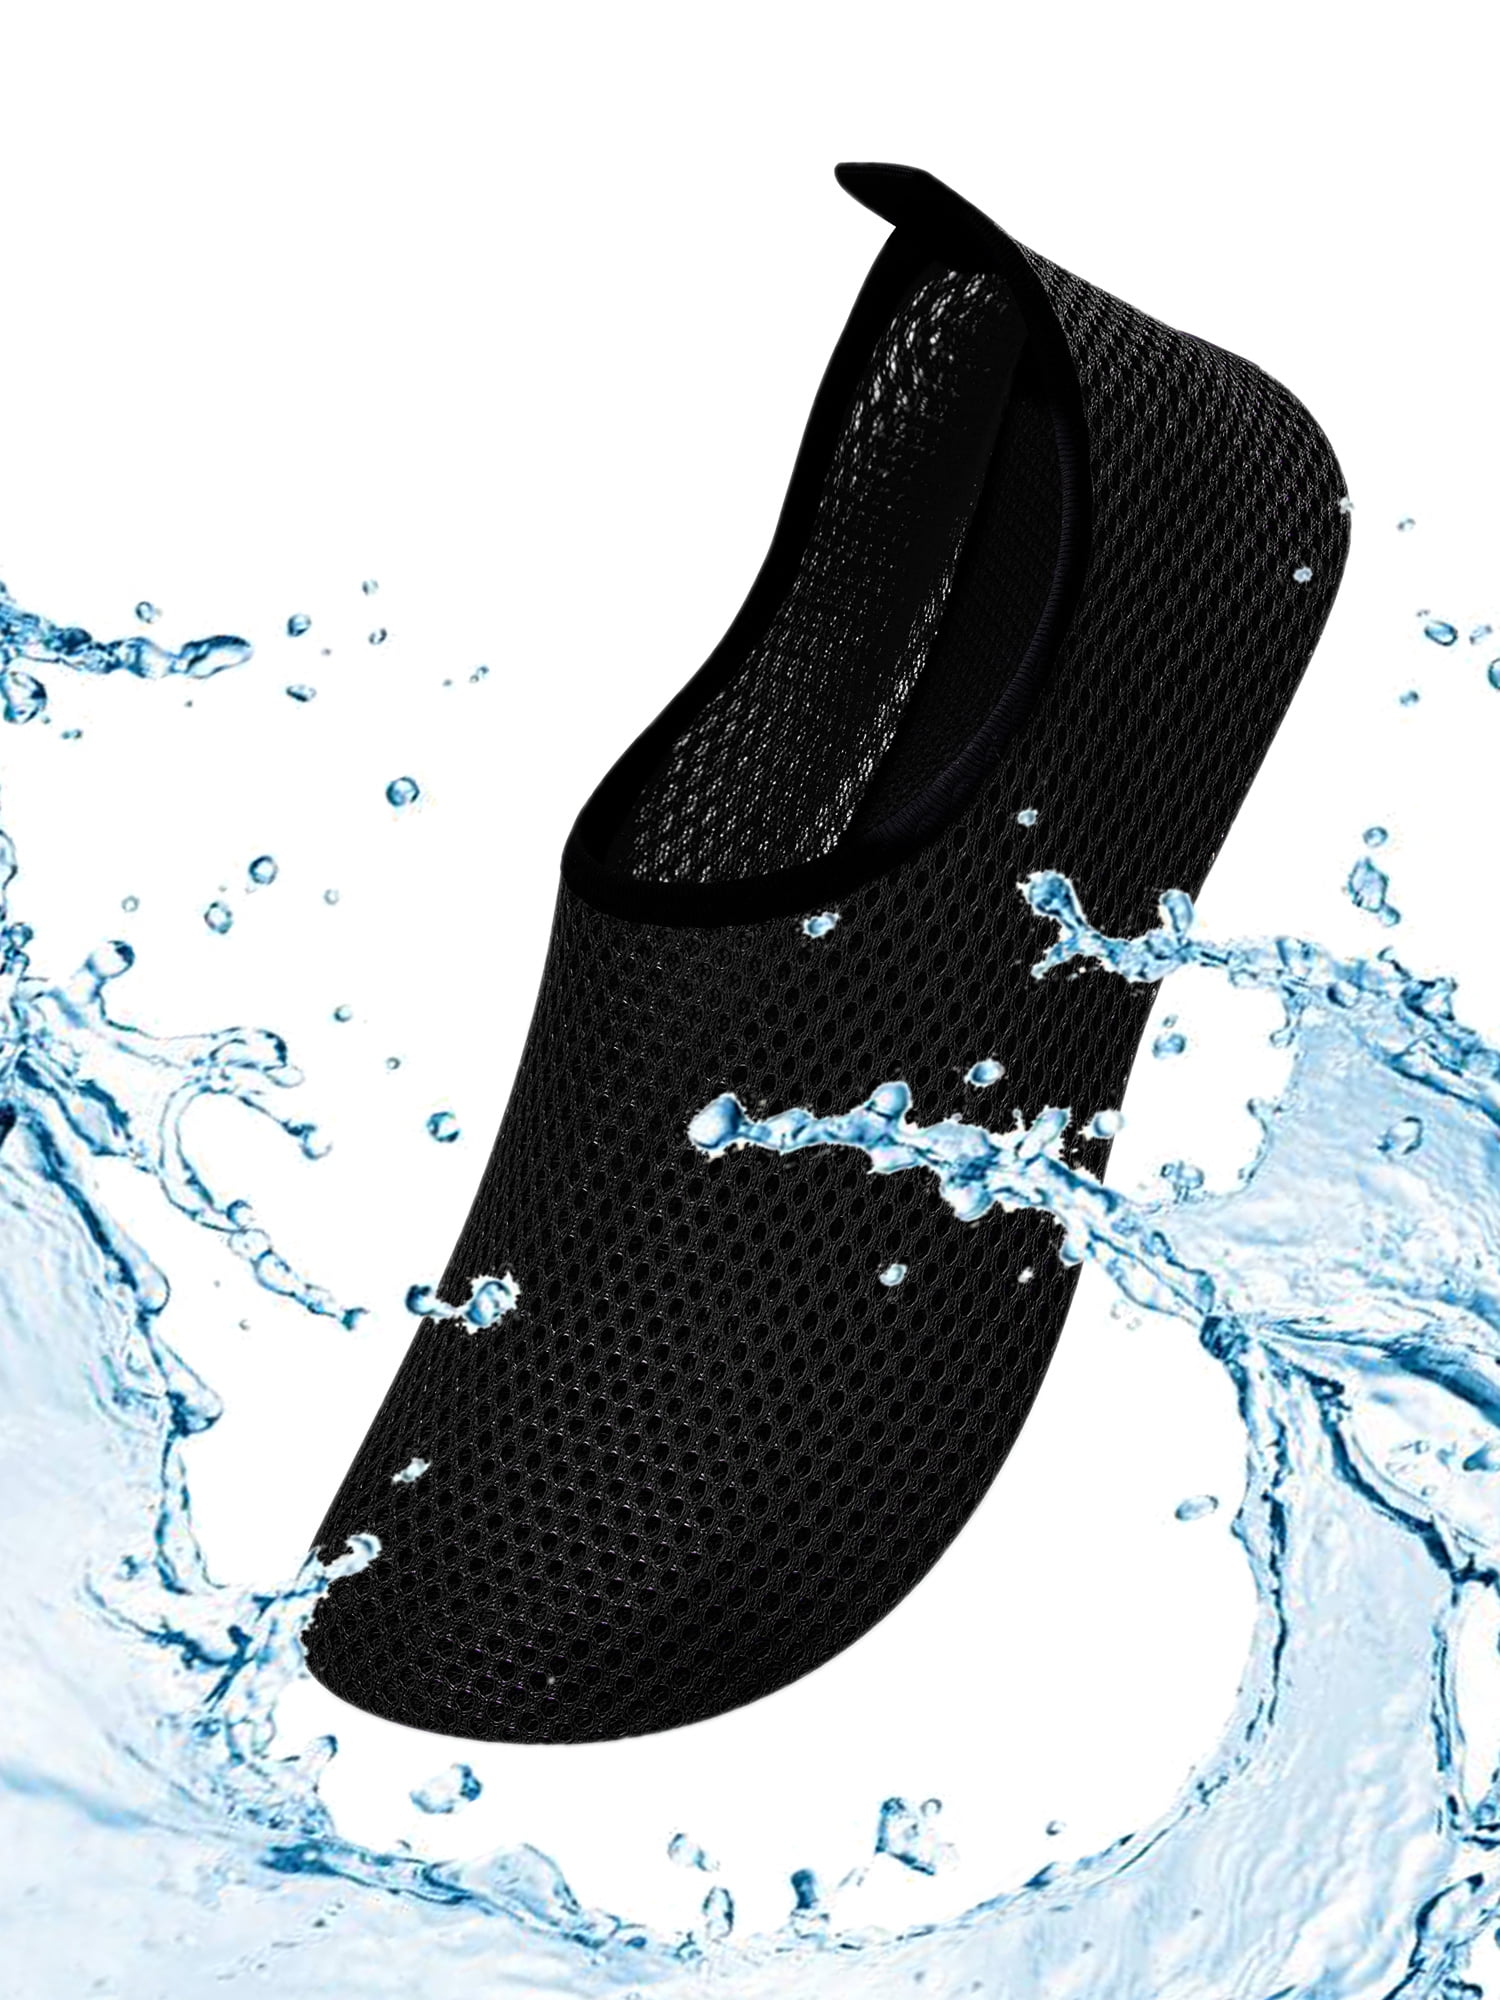 JOINFREE Men Women Beach Barefoot Quick Dry Water Shoes for Men Auqa Shoes  Anti-Skid Aqua Socks for Yoga Sports Beach Pure Green 9.5-10.5 Women/ 7.5-8  Men : : Clothing, Shoes & Accessories